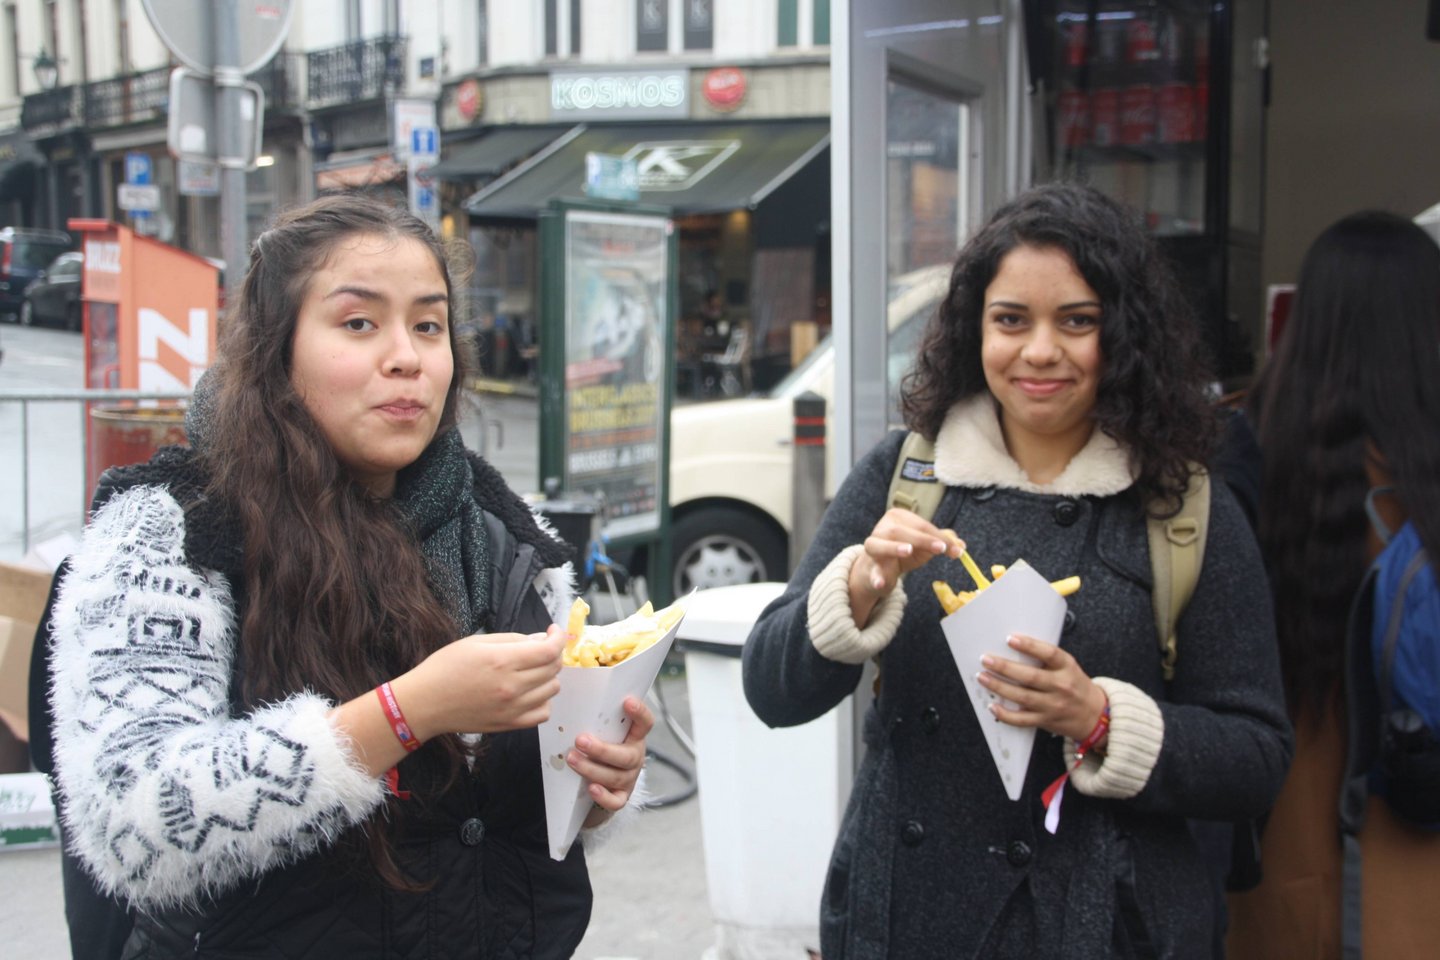 Two students about to eat belgian fries